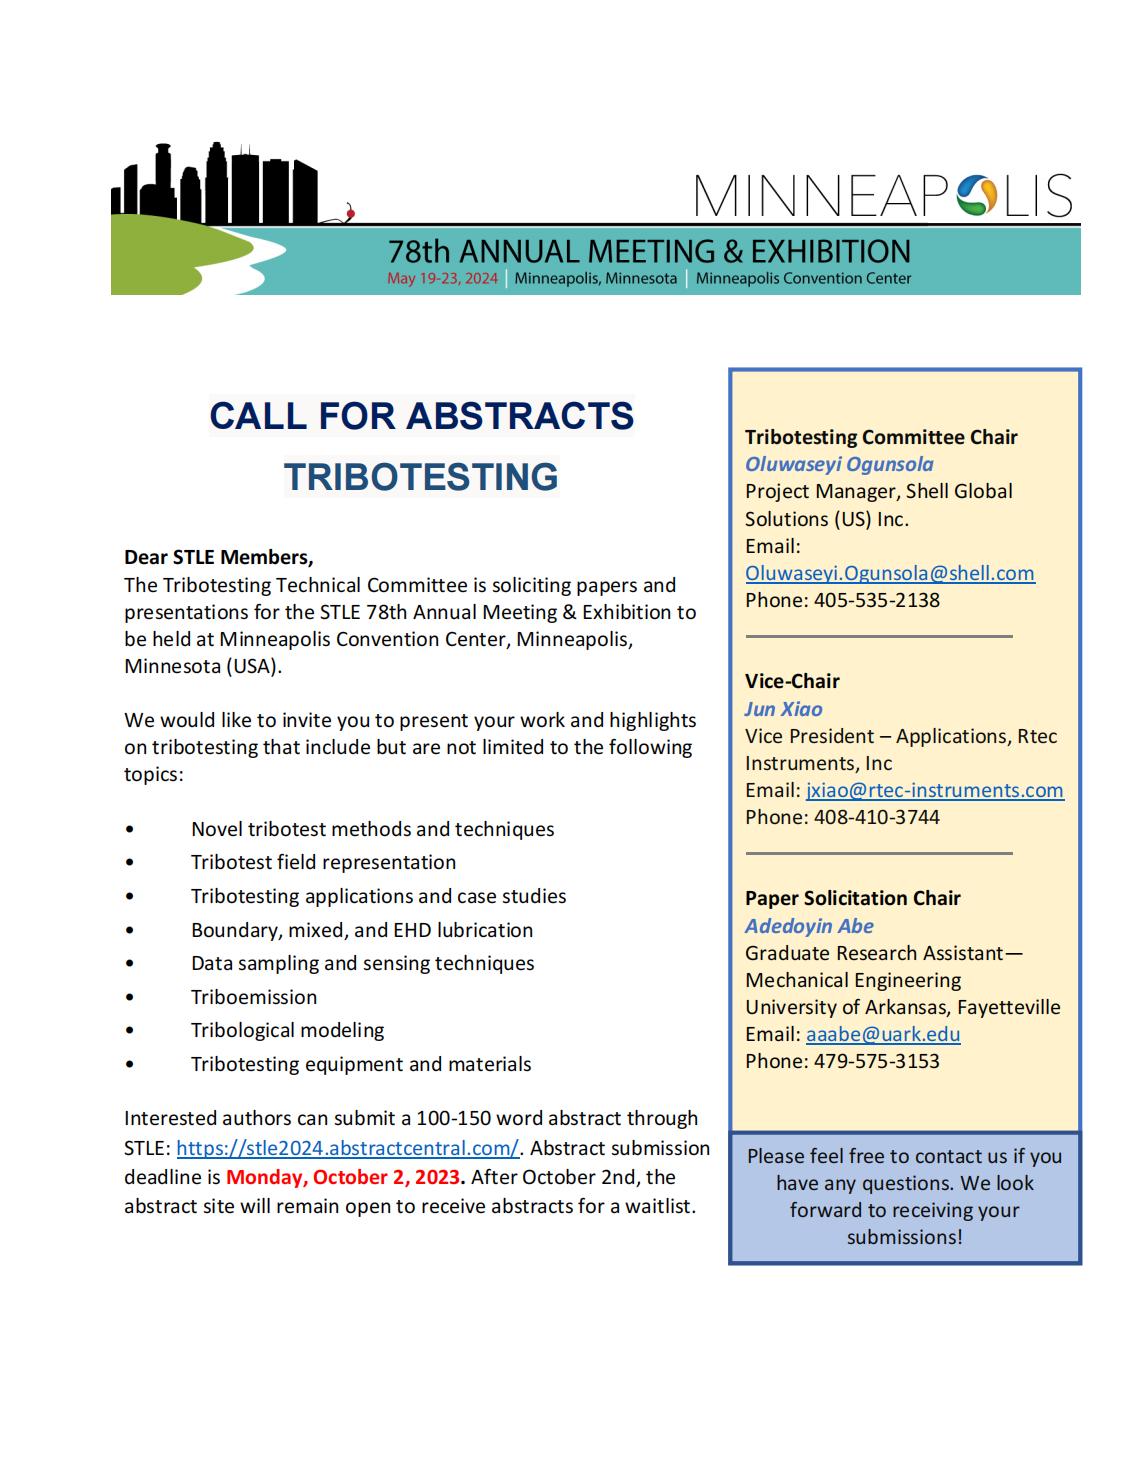 Call for Abstracts STLE 78th Annual Meeting_00.jpg